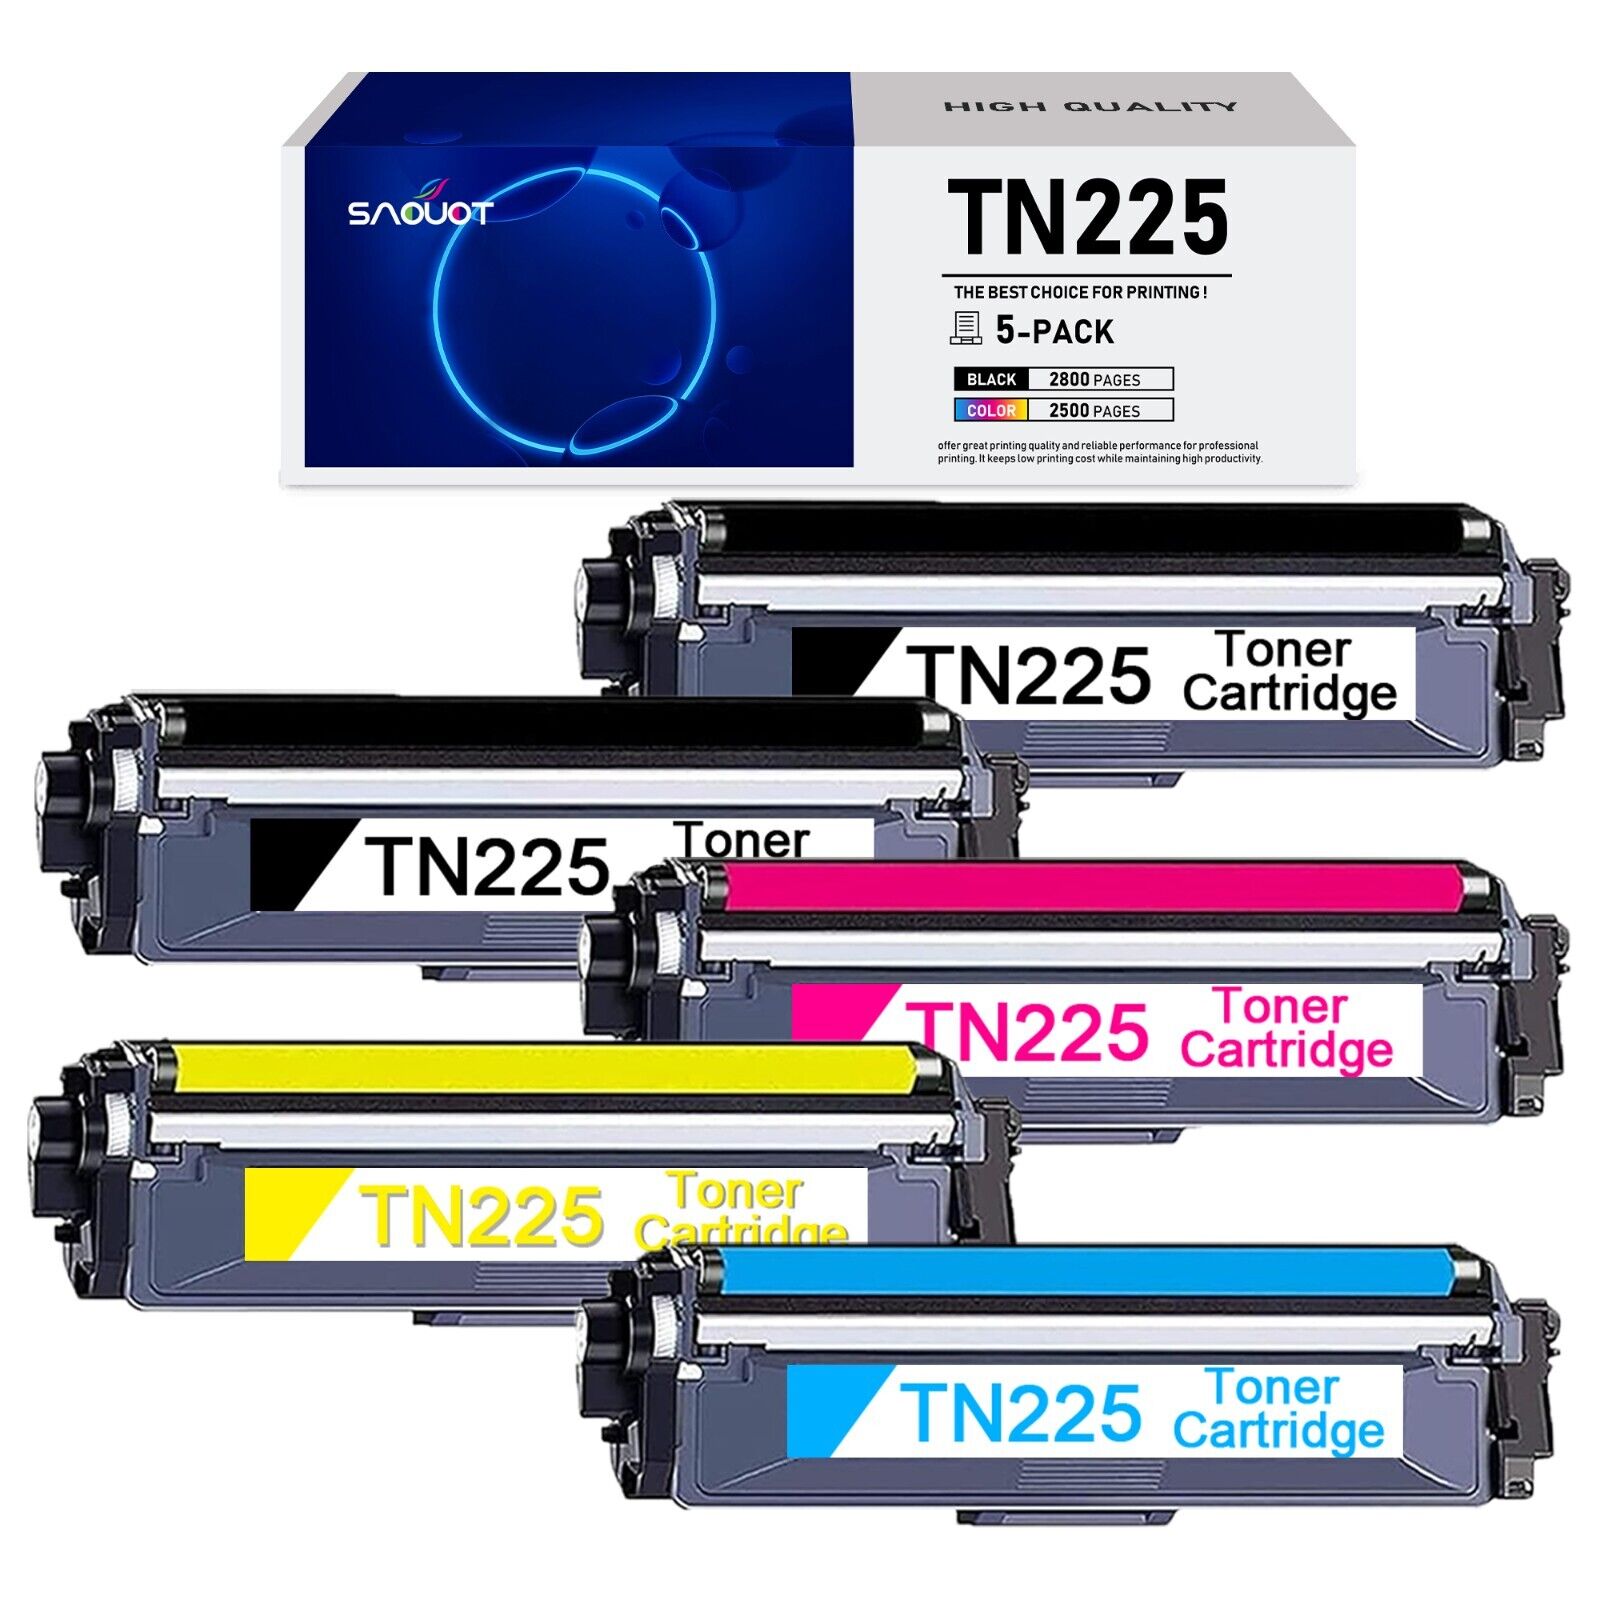 TN225 Toner Cartridge Replacement for Brother MFC-9140CDN HL-3150CDN 3140CW